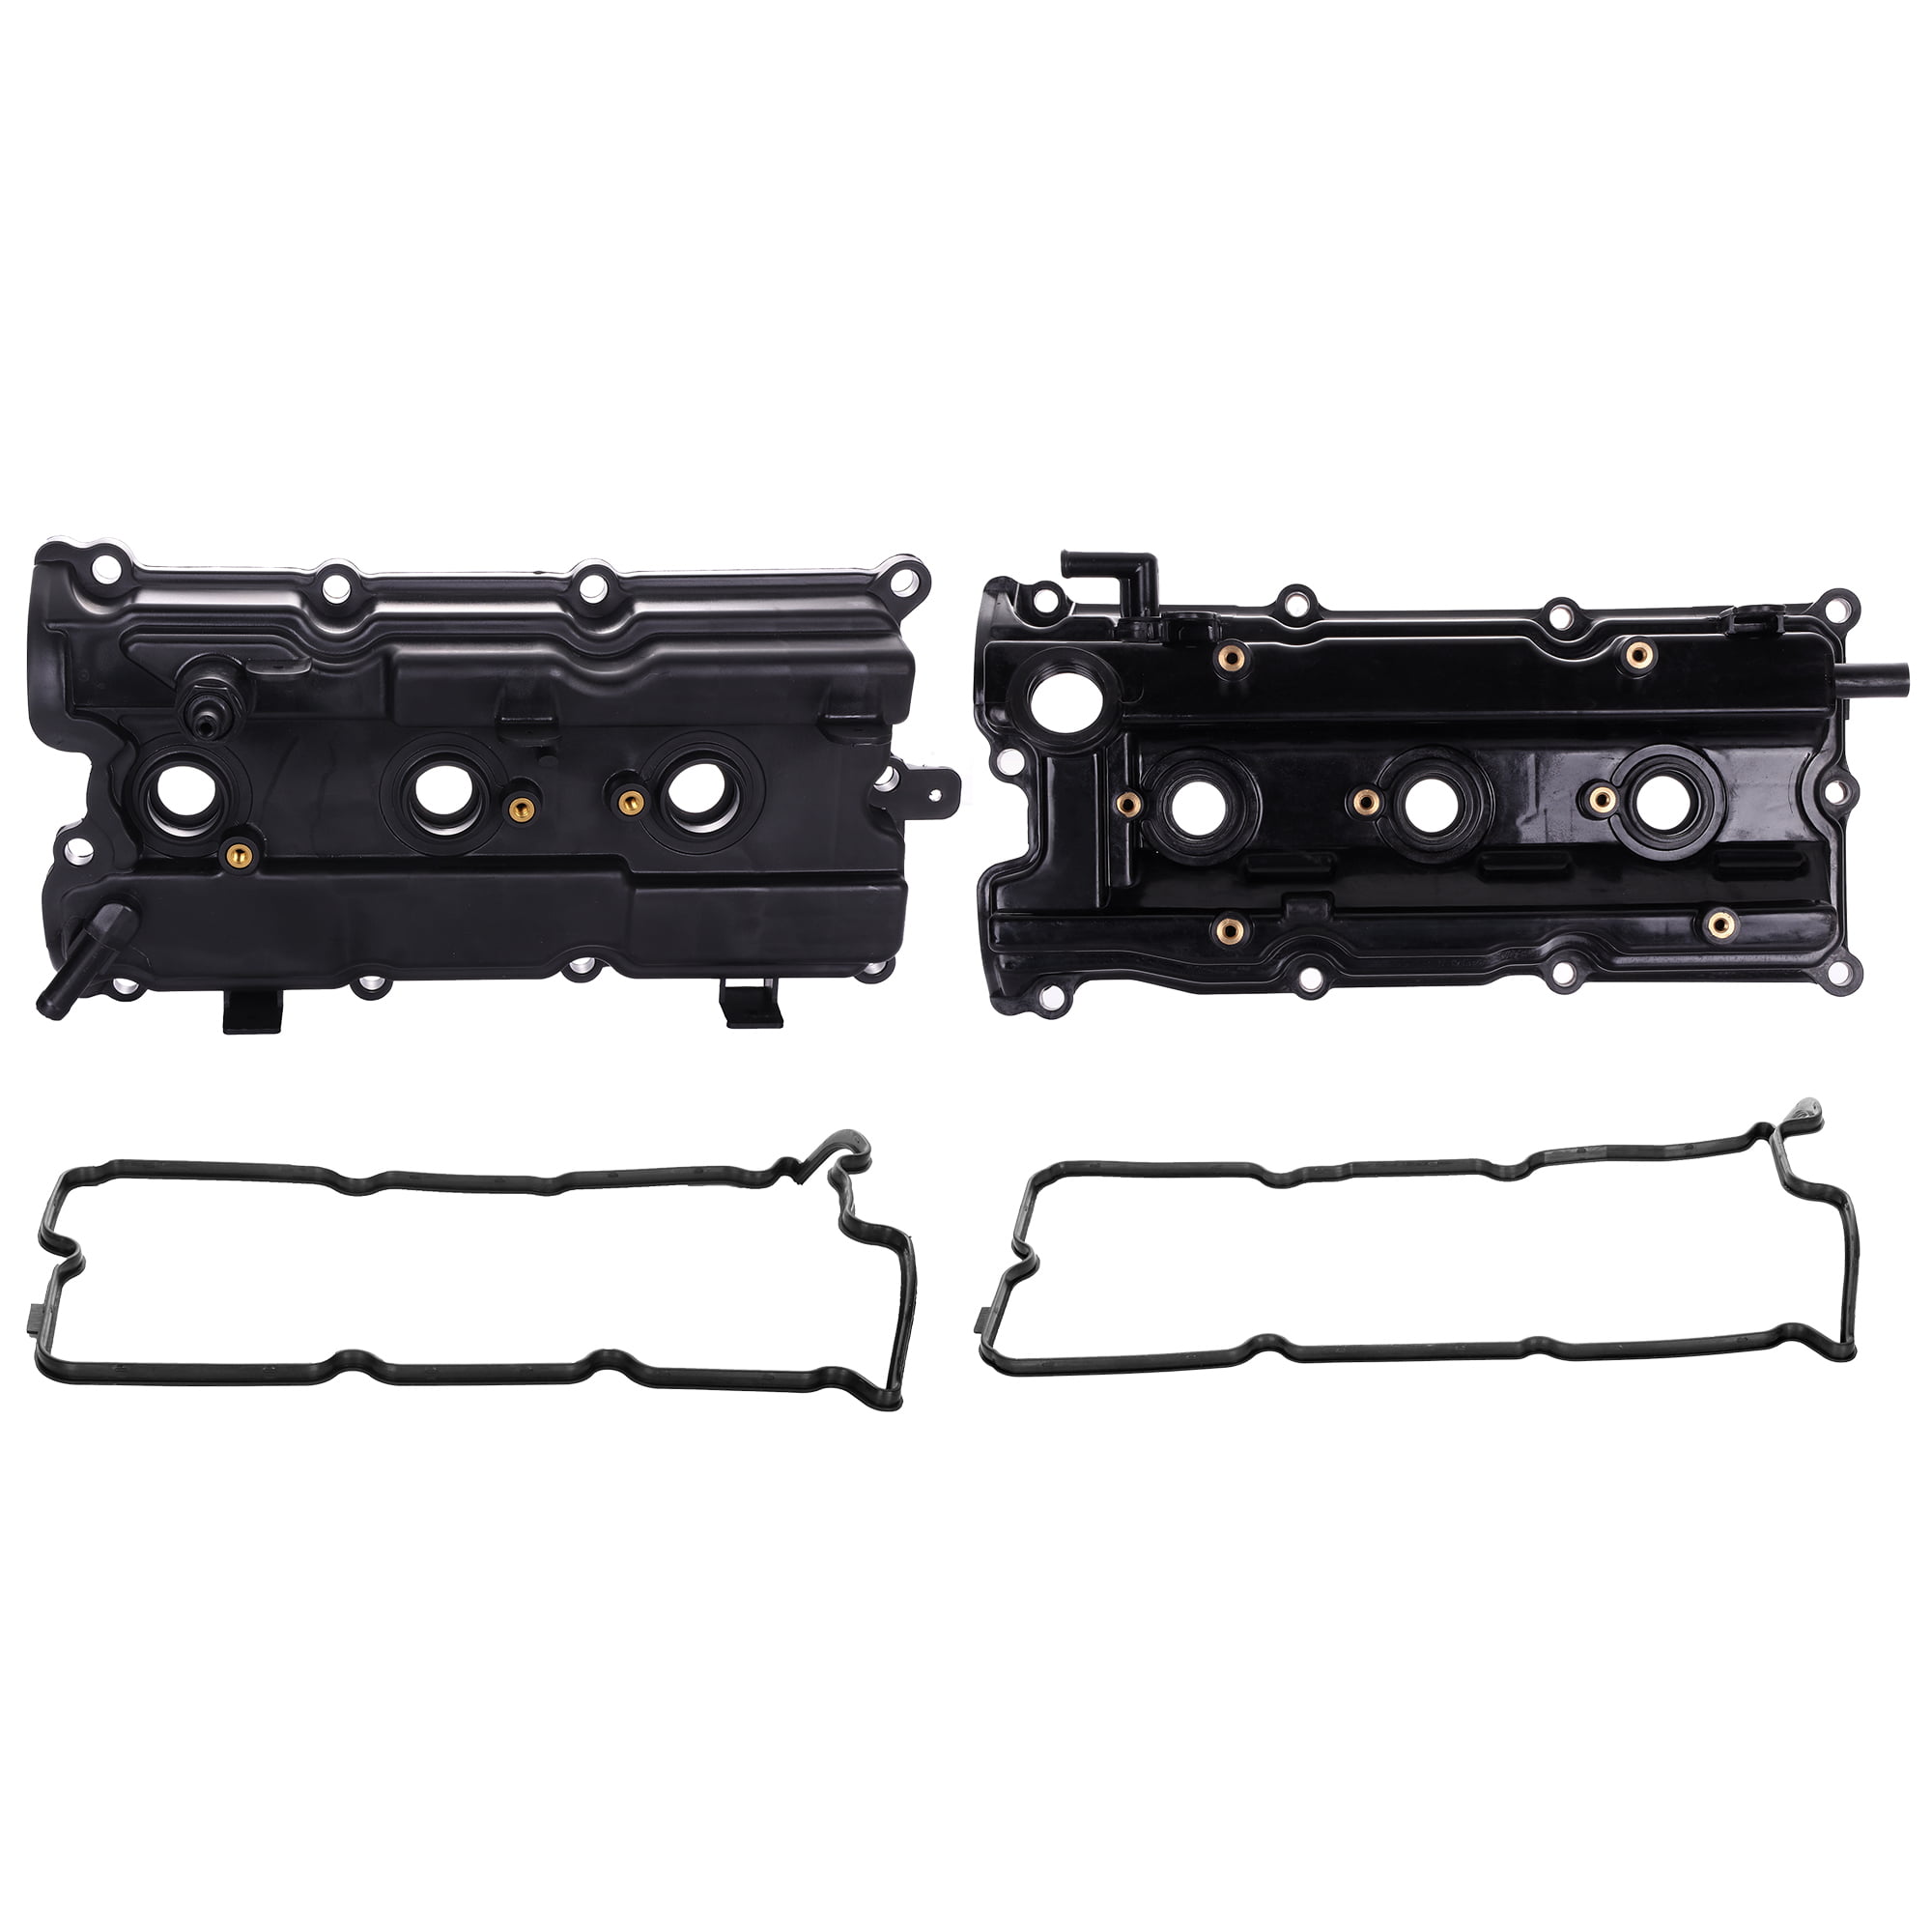 ECCPP Valve Cover with Valve Cover Gasket for 2002-2008 Nissan Altima Nissan Murano Infiniti I35 Compatible fit for Engine Valve Covers Kit 